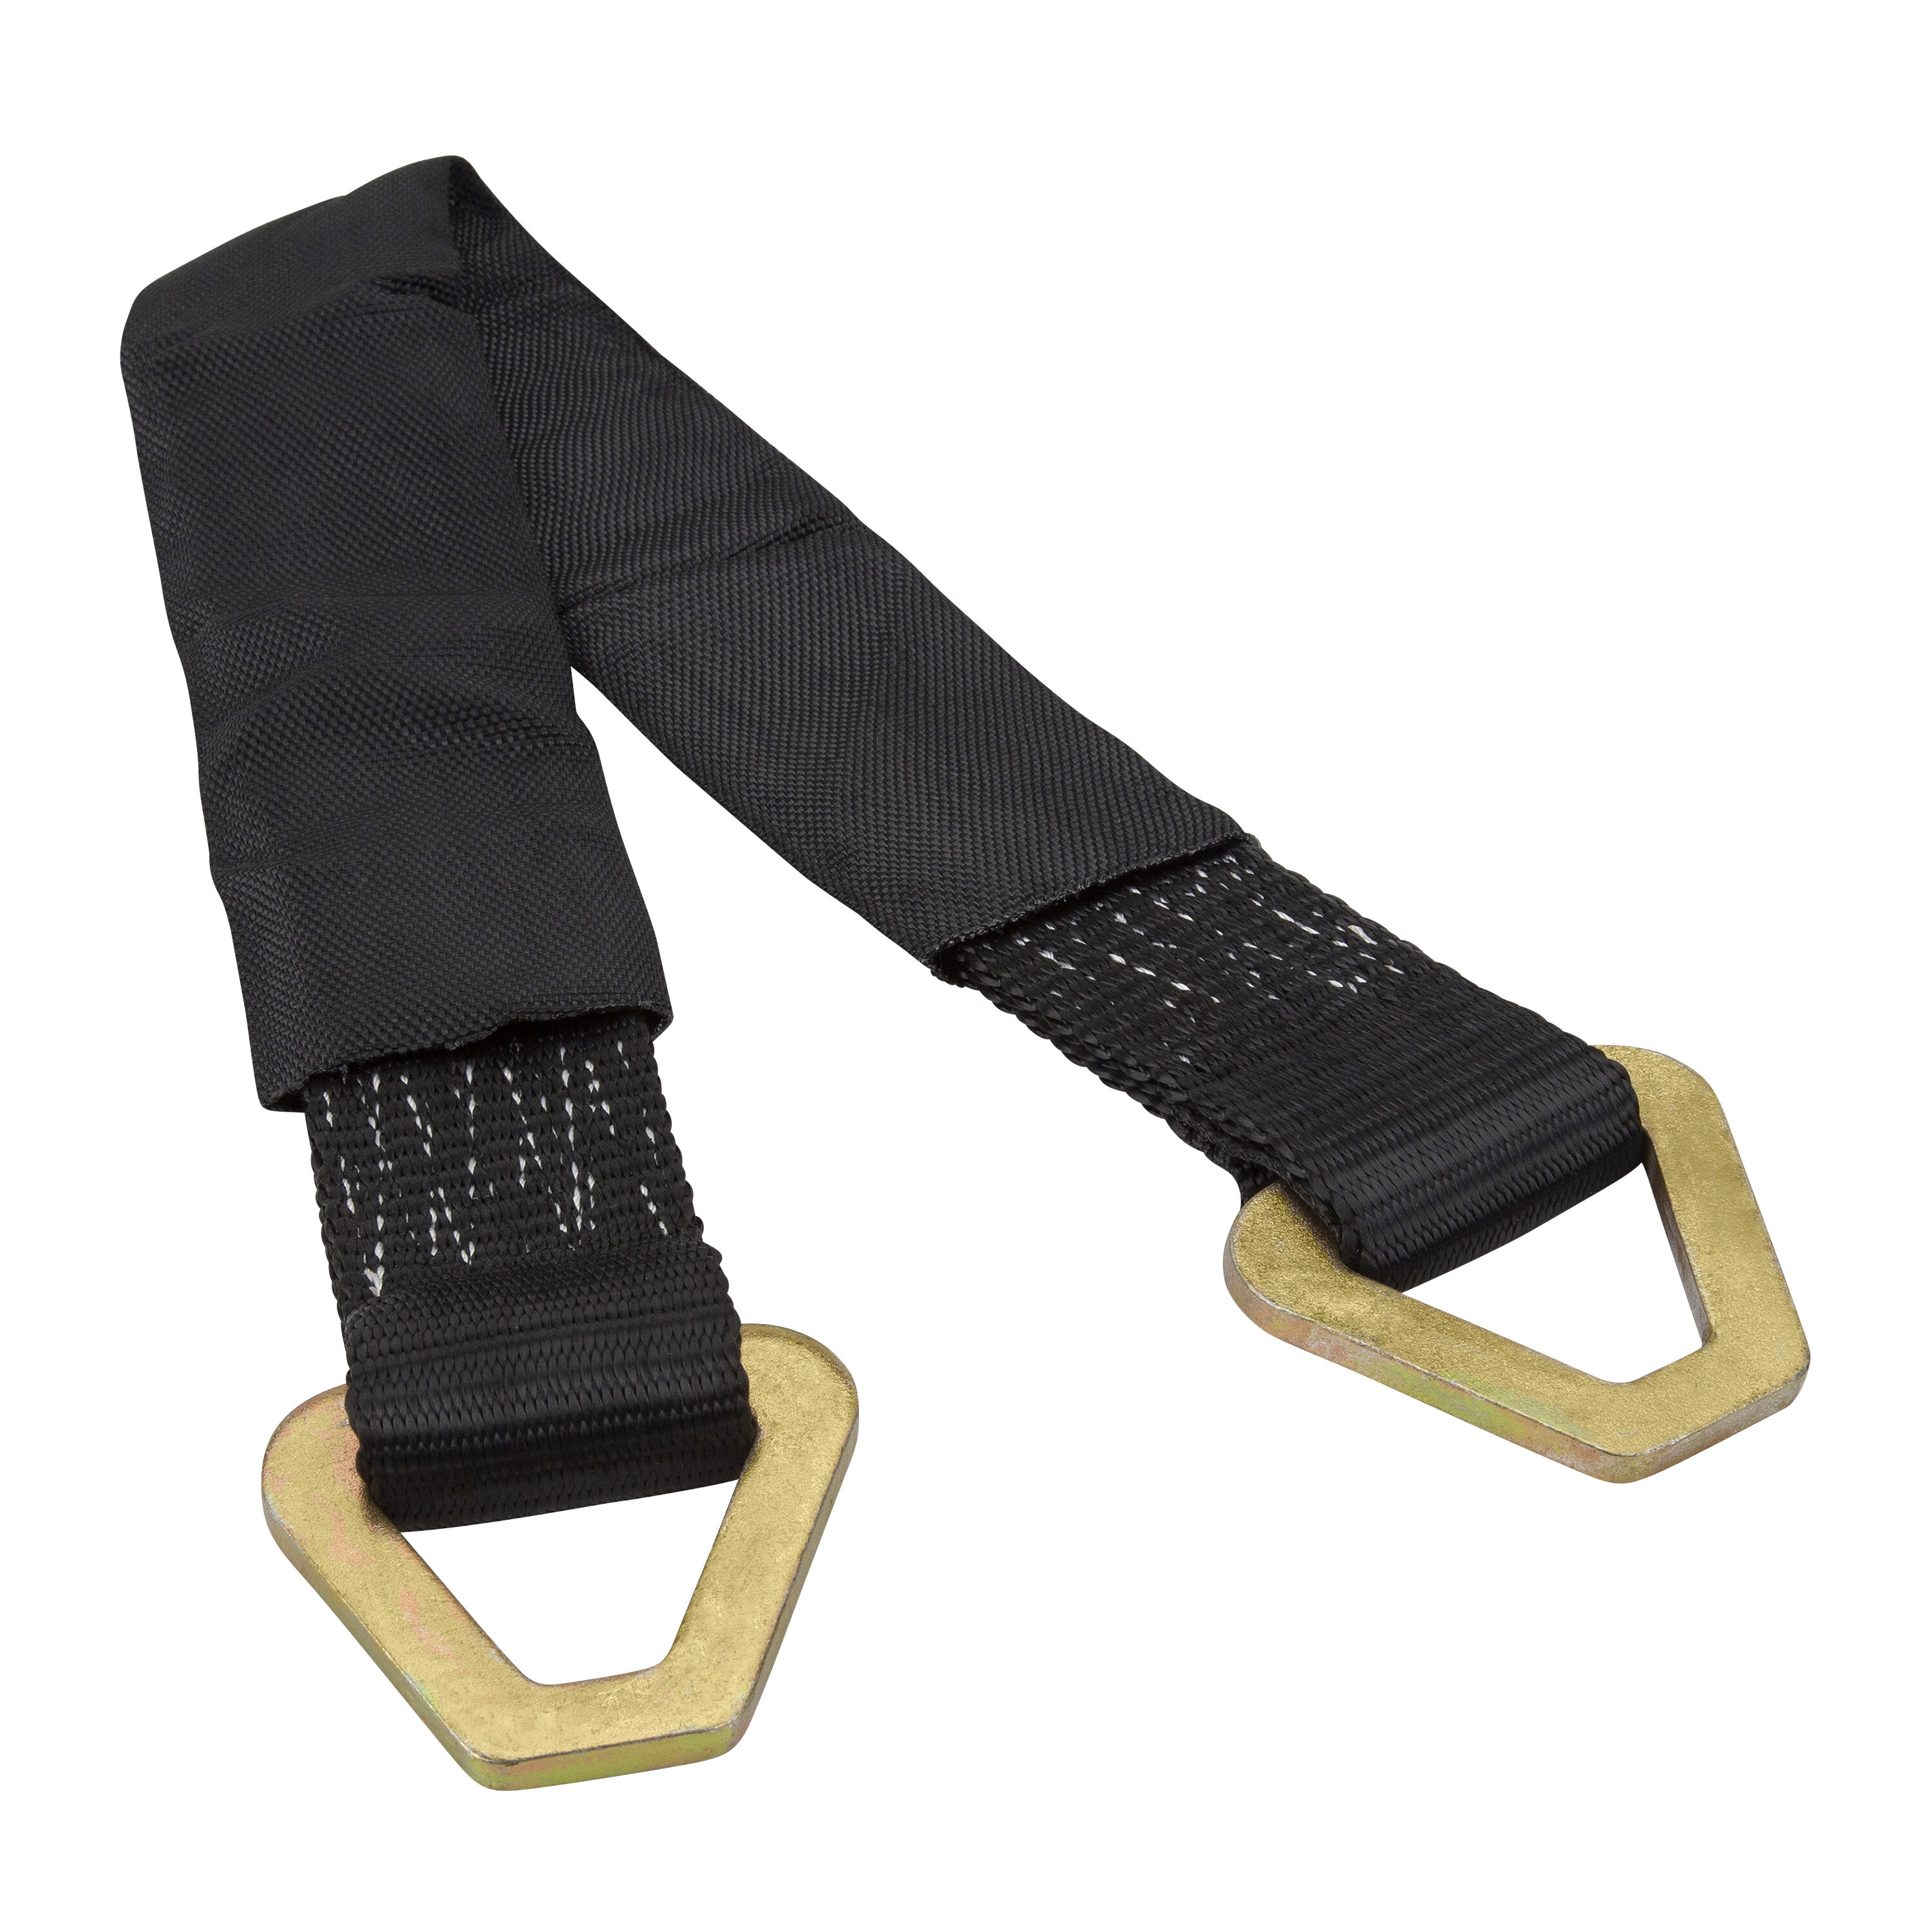 2 Inch Axle Extension Strap